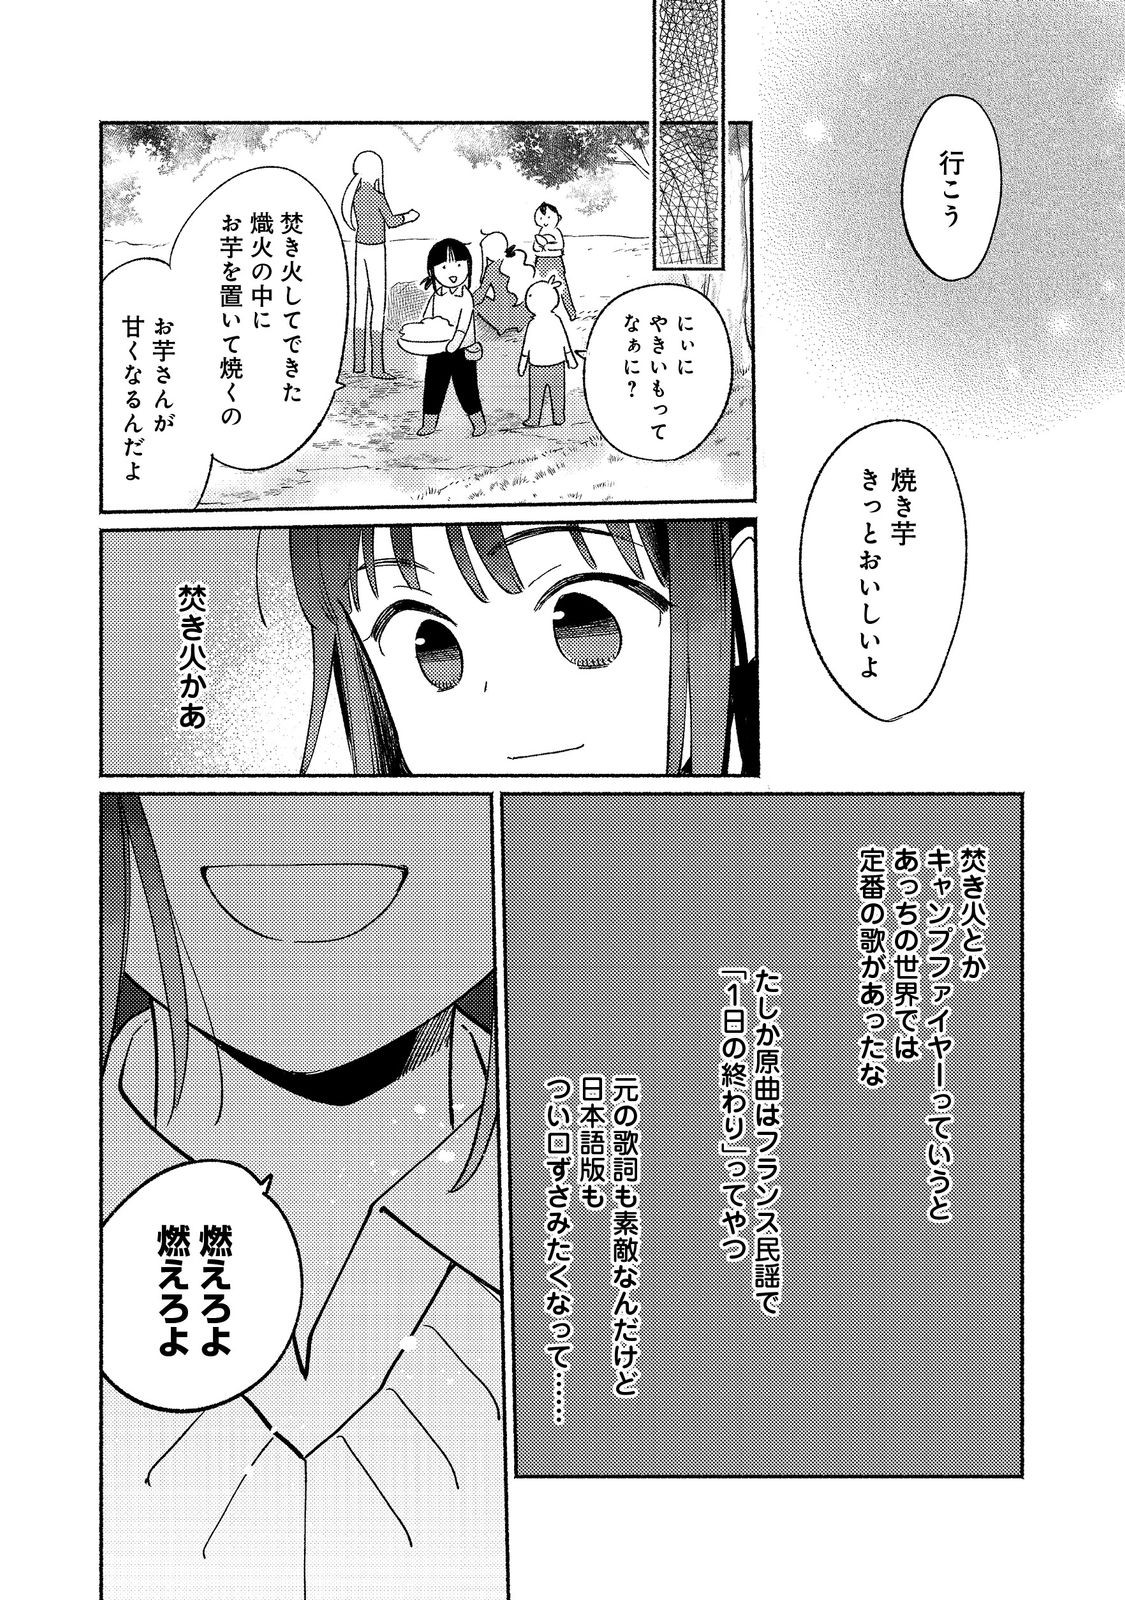 I’m the White Pig Nobleman 第18.2話 - Page 5